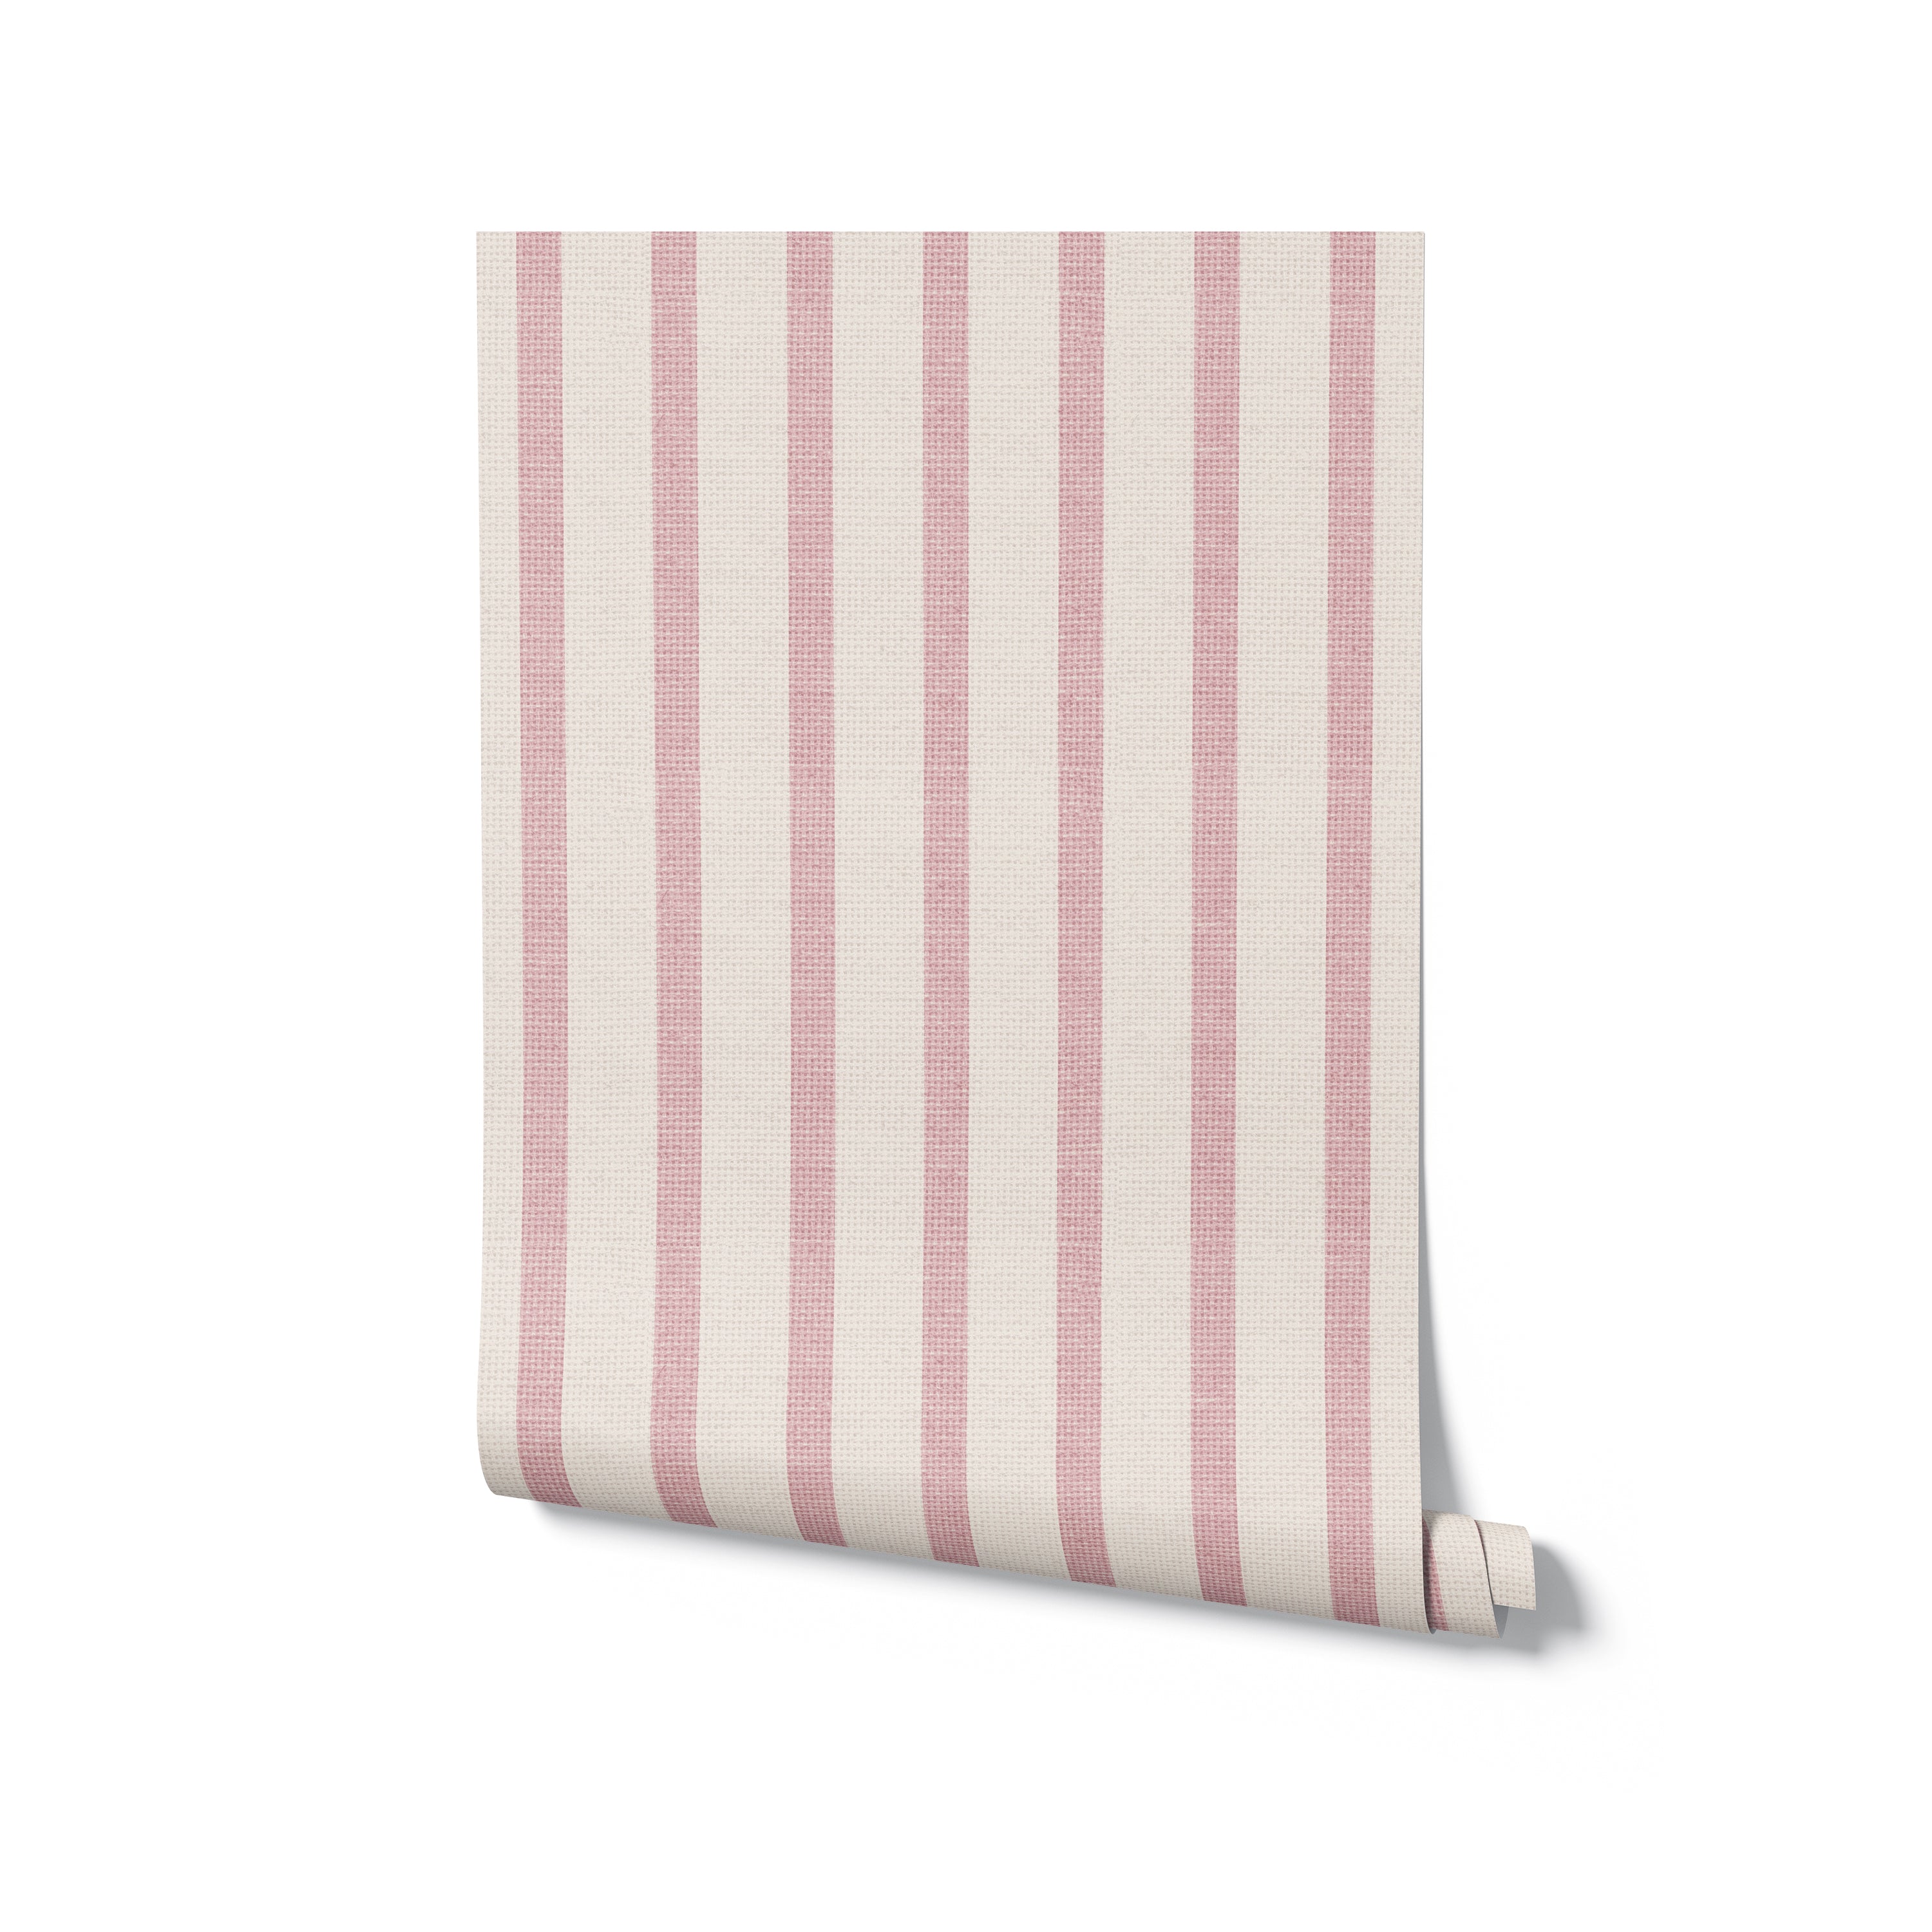 Roll of Pink Textured Striped Wallpaper slightly unrolled, showing detailed textured stripes in alternating shades of pink. This wallpaper is perfect for adding a touch of elegance and vibrancy to interior spaces